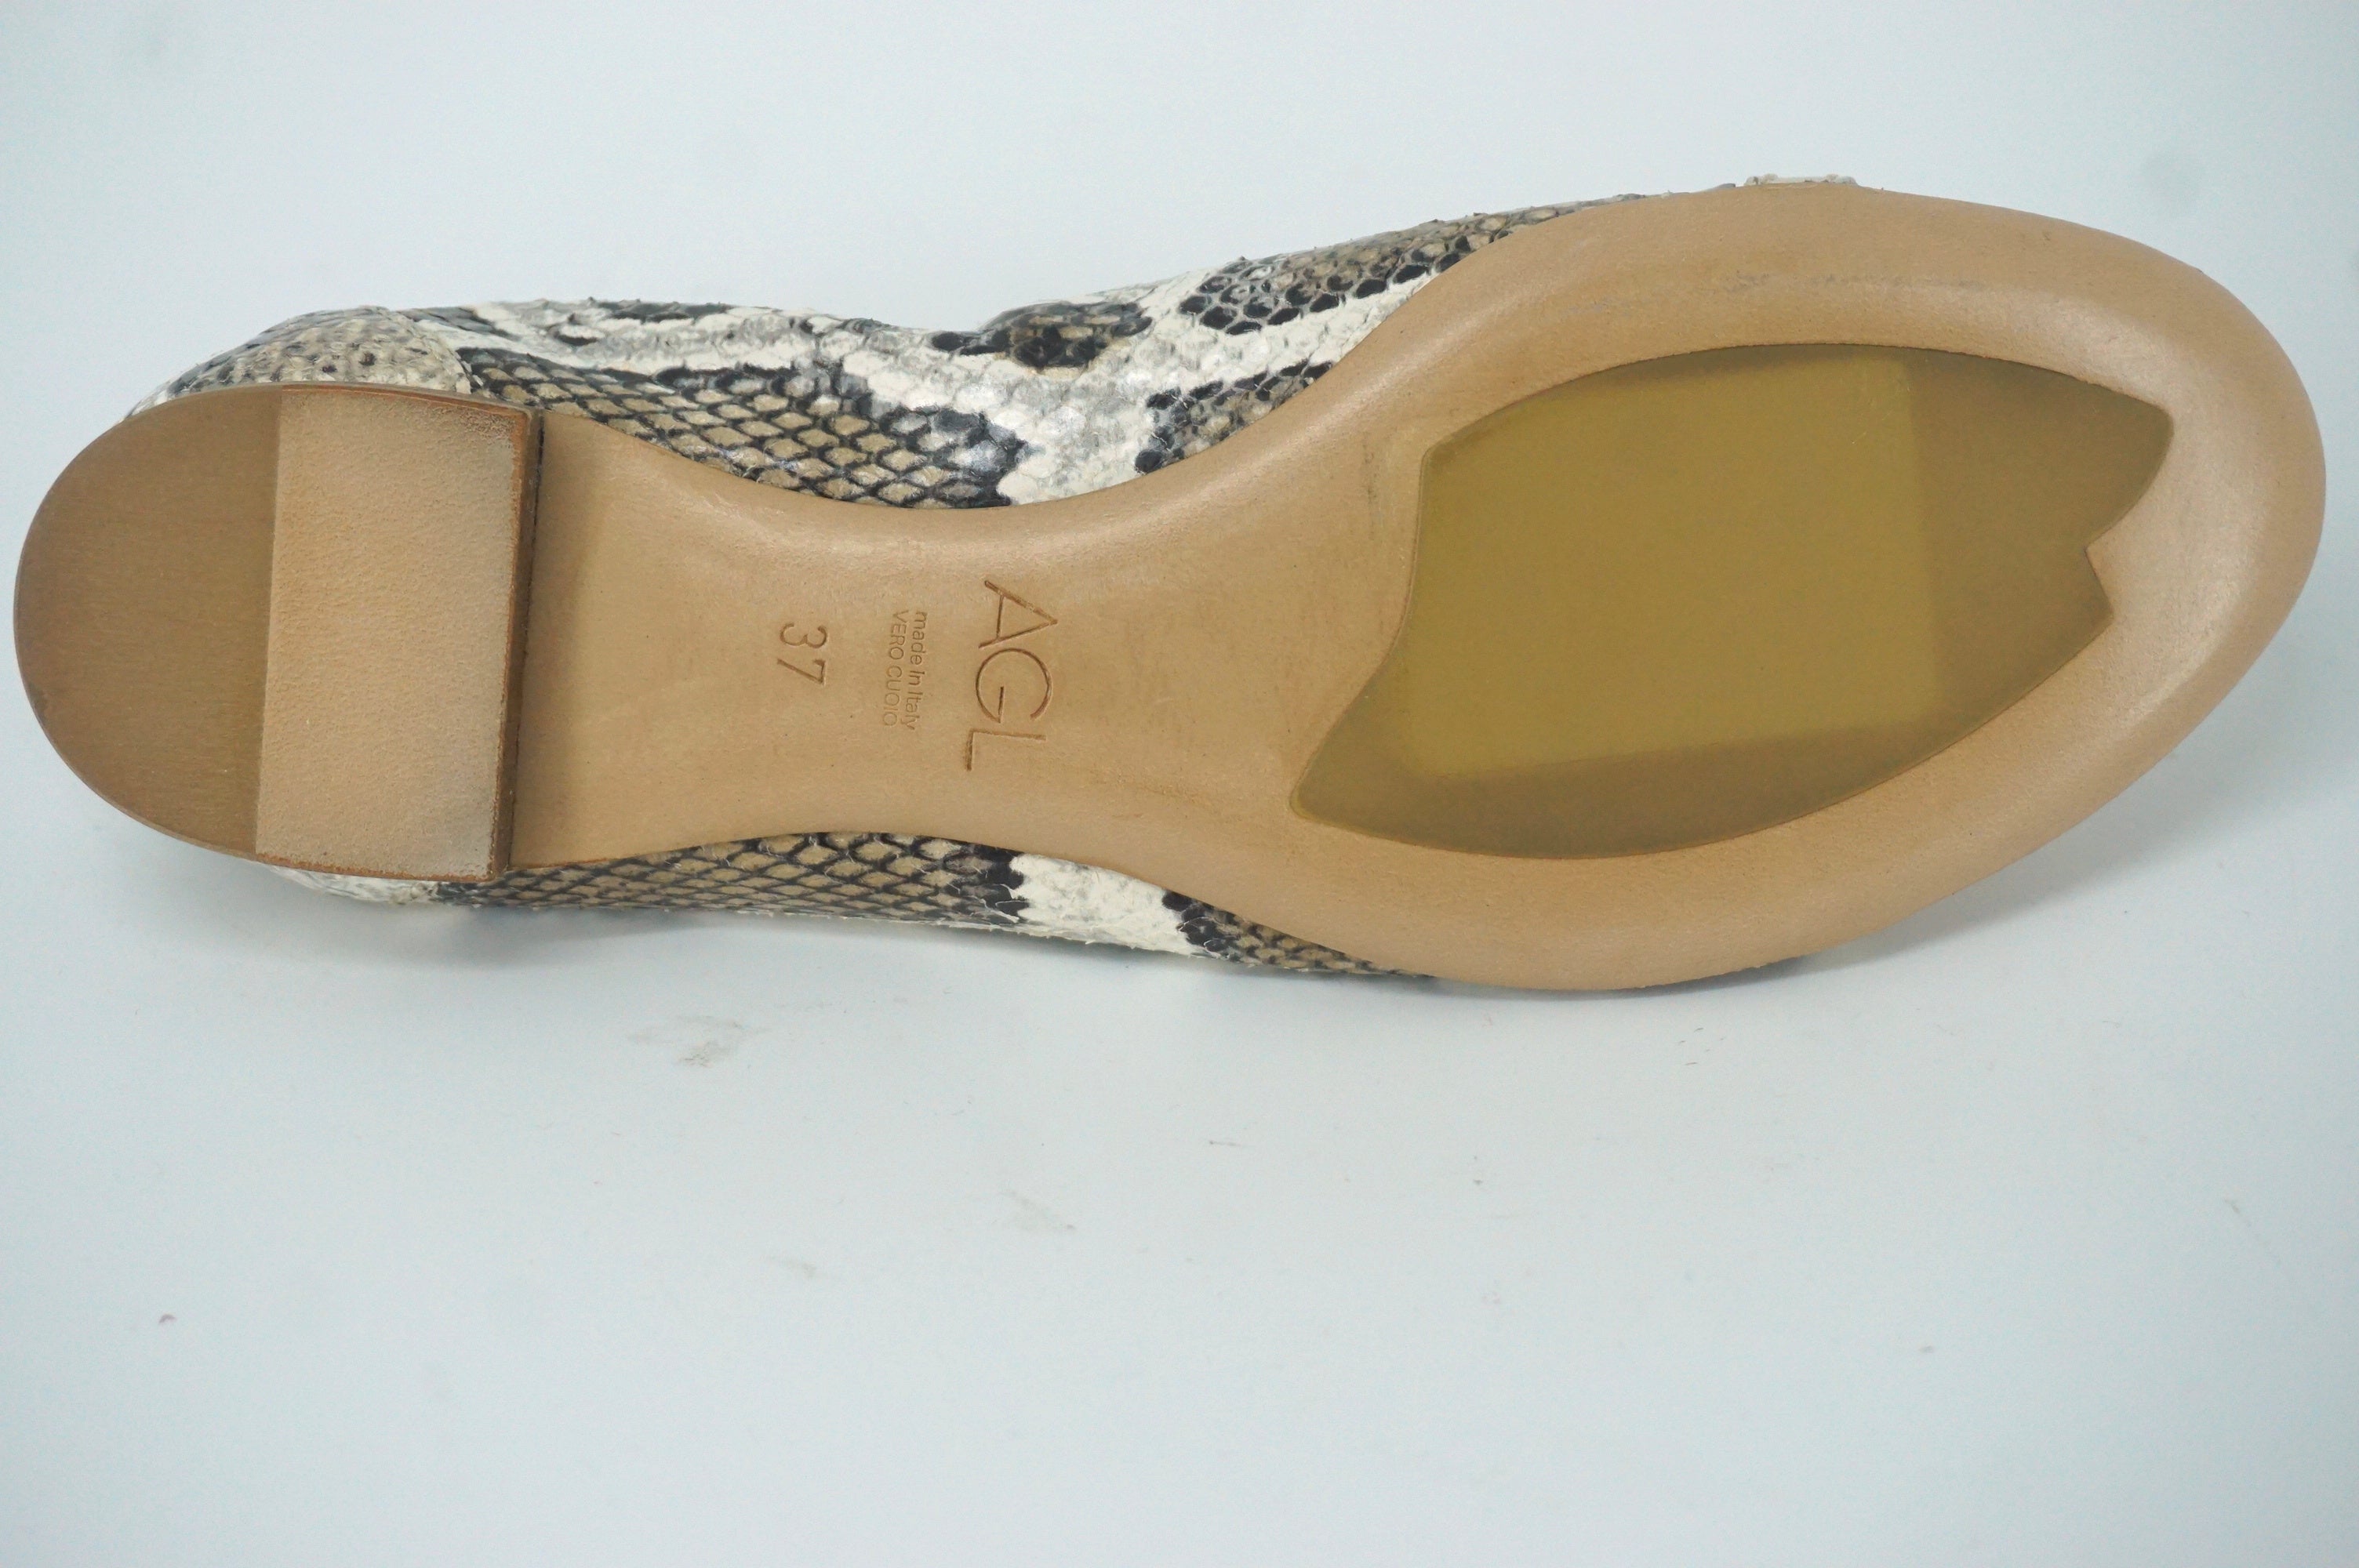 AGL Womens Link Ballet Flat Taupe Leather Size 37